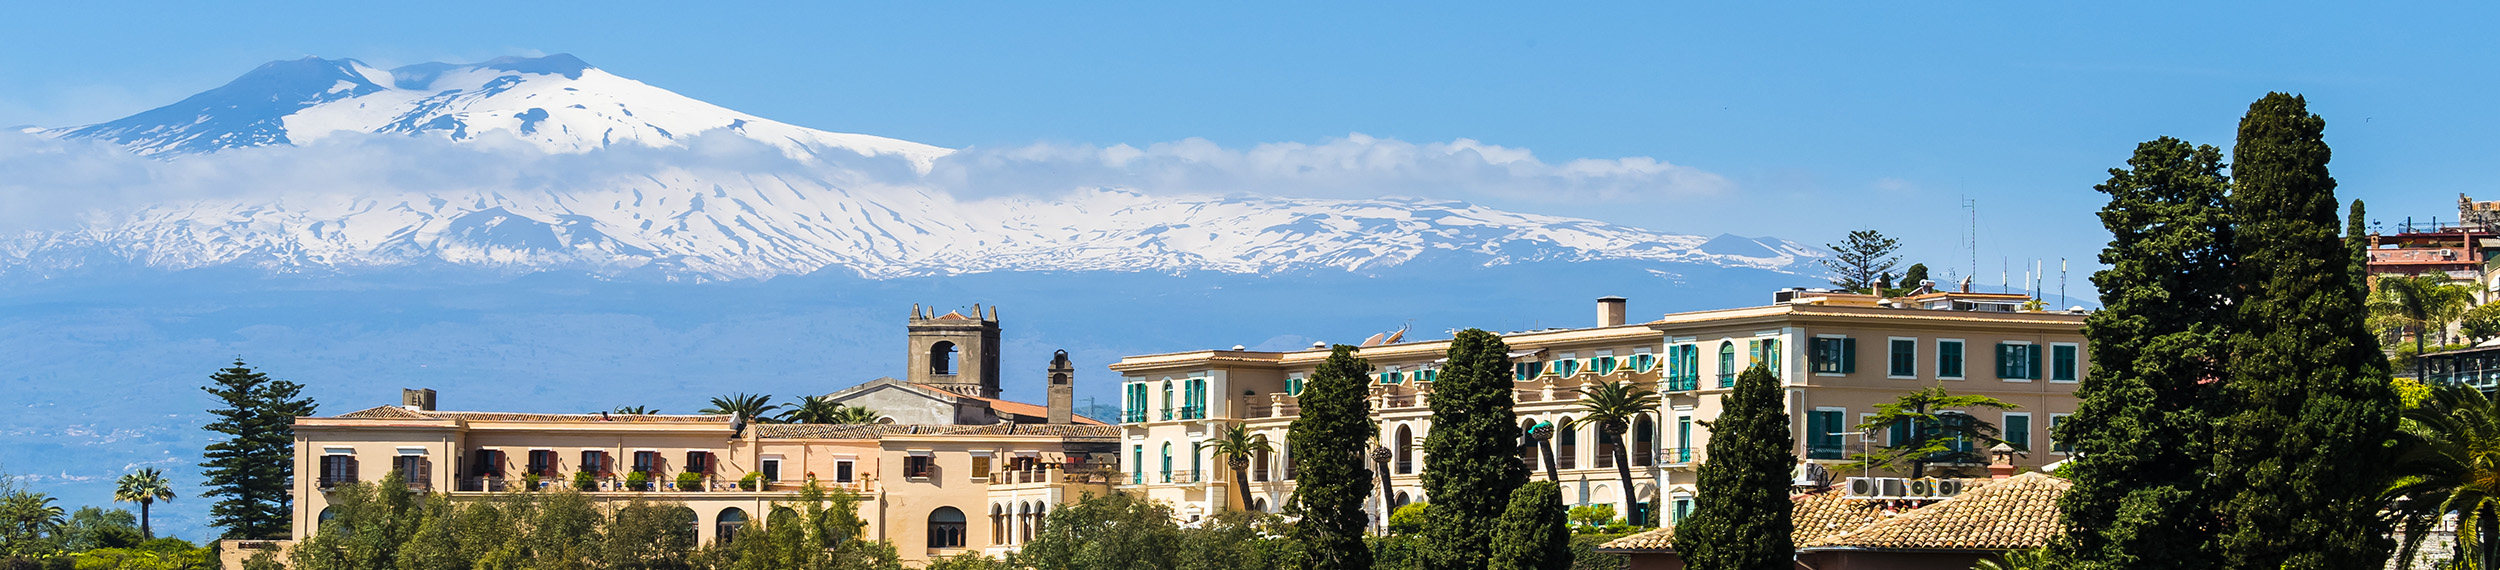 Mt. Etna serves as a backdrop to a hotel in Taormina, Sicily.